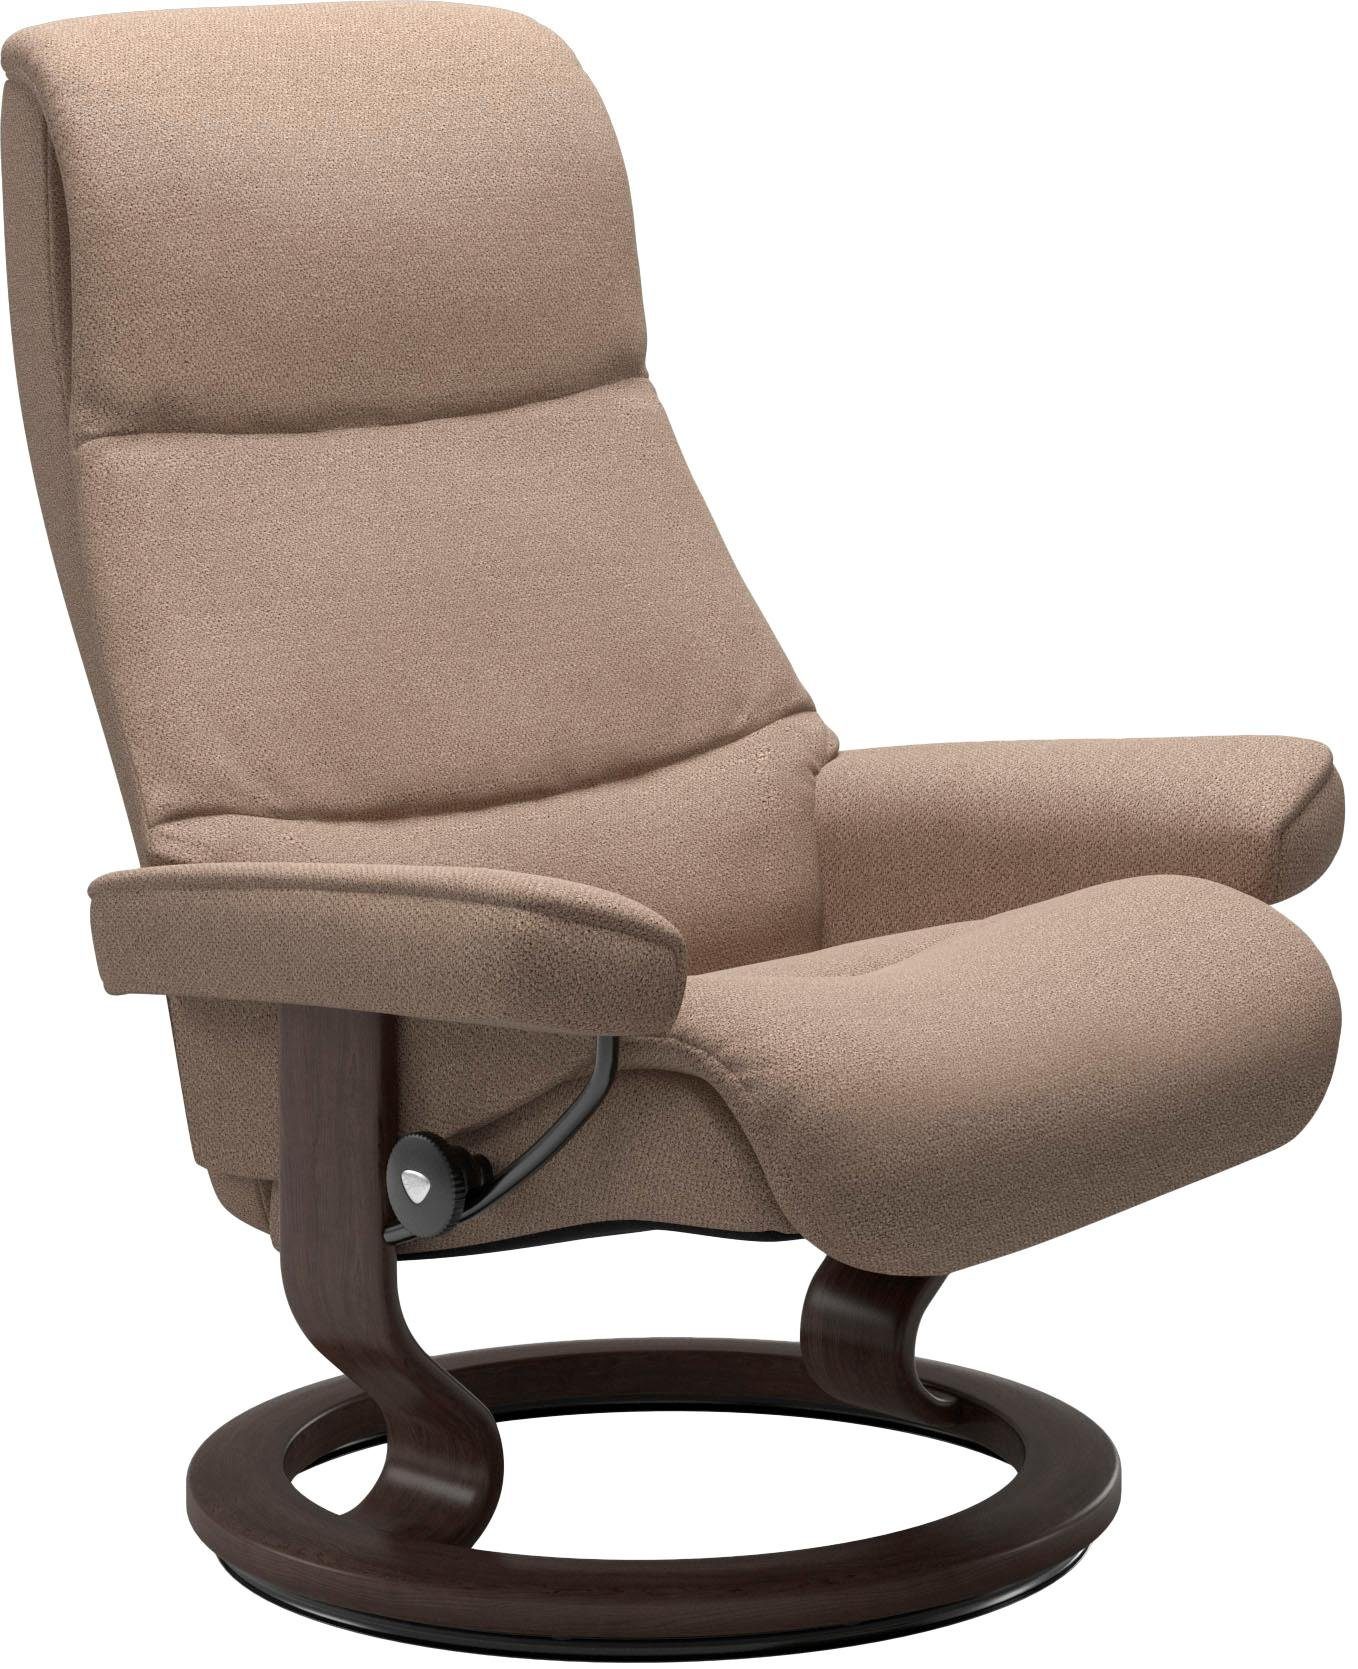 mit Classic L,Gestell Stressless® Relaxsessel Base, Größe Wenge View,